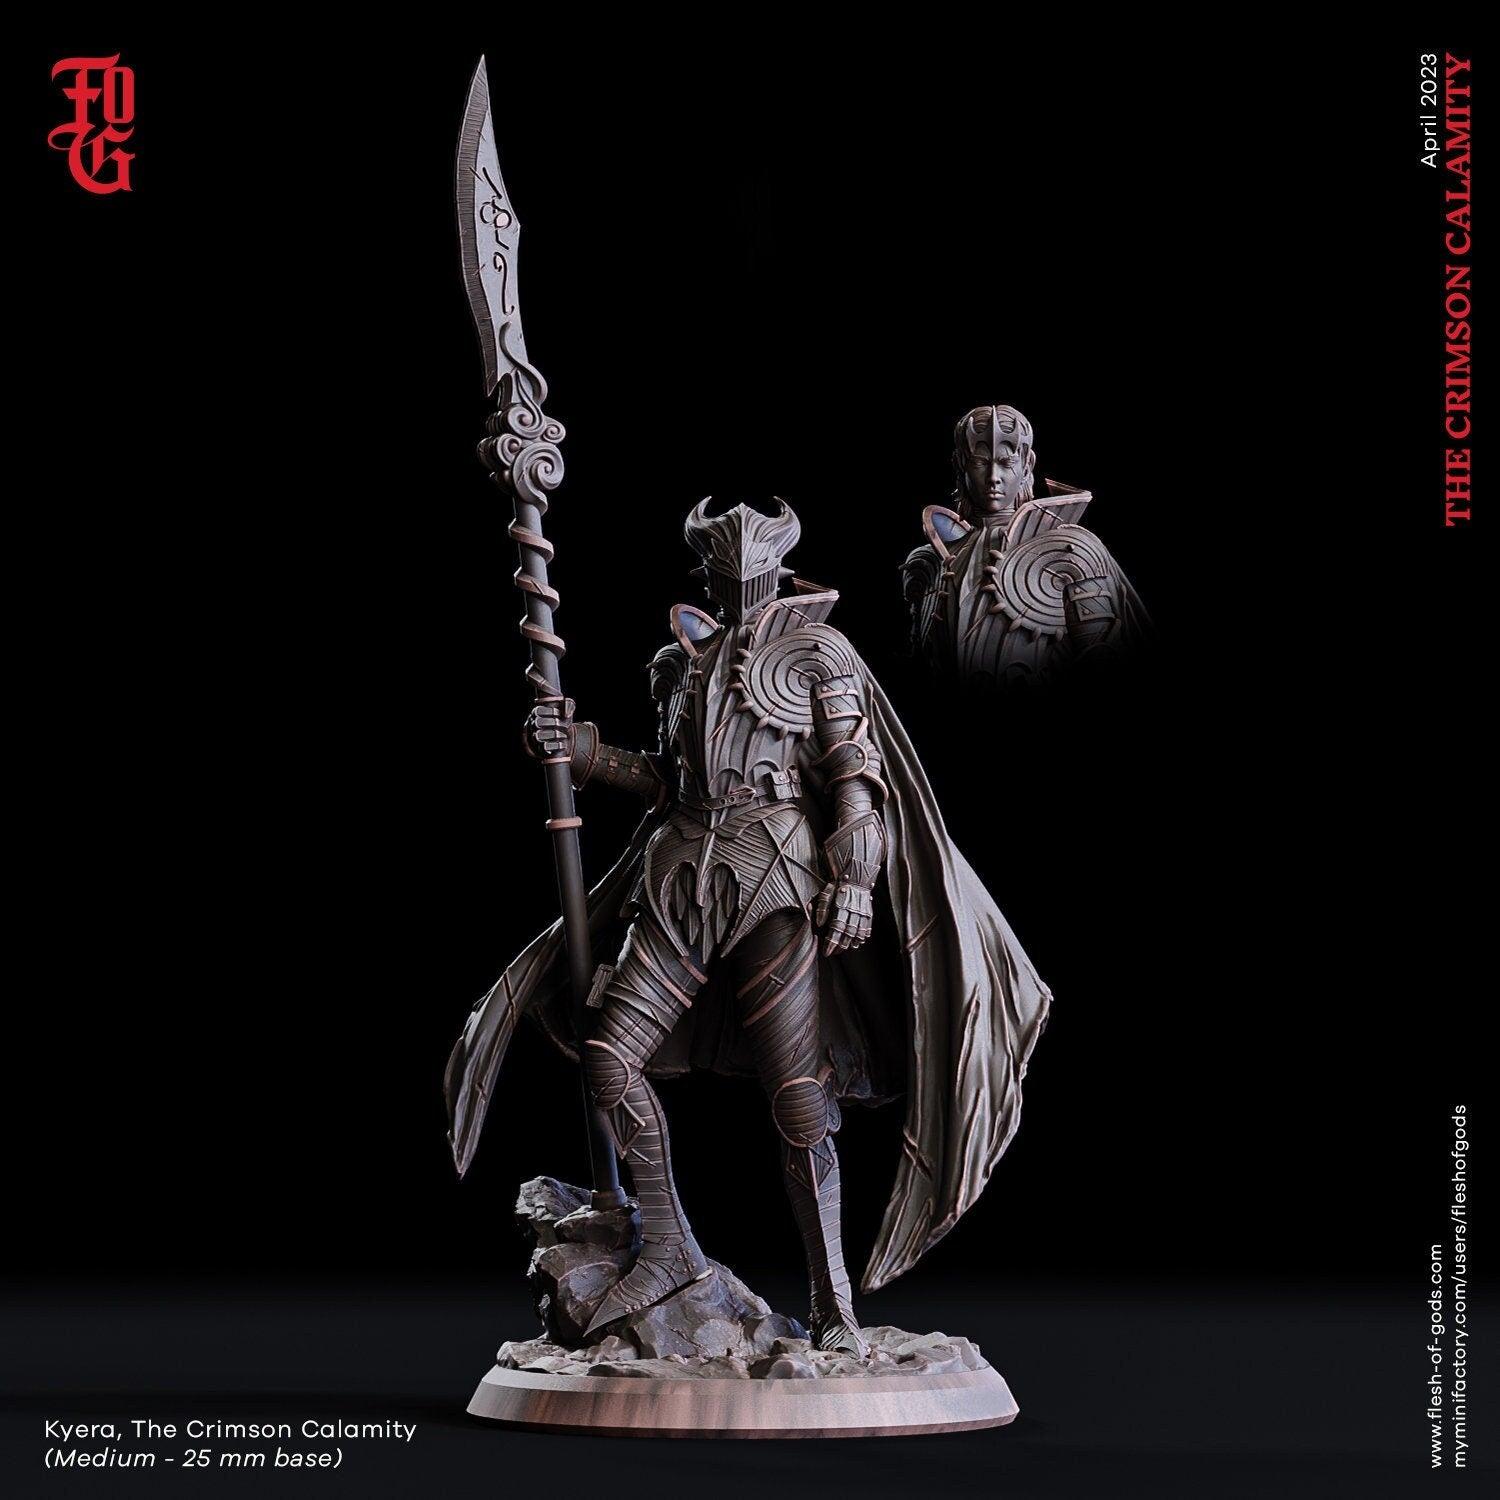 Human Female Warrior with spear | 25mm Base 75mm Scale and Bust | DnD Miniature Dungeons and Dragons DnD 5e fighter miniature paladin - Plague Miniatures shop for DnD Miniatures